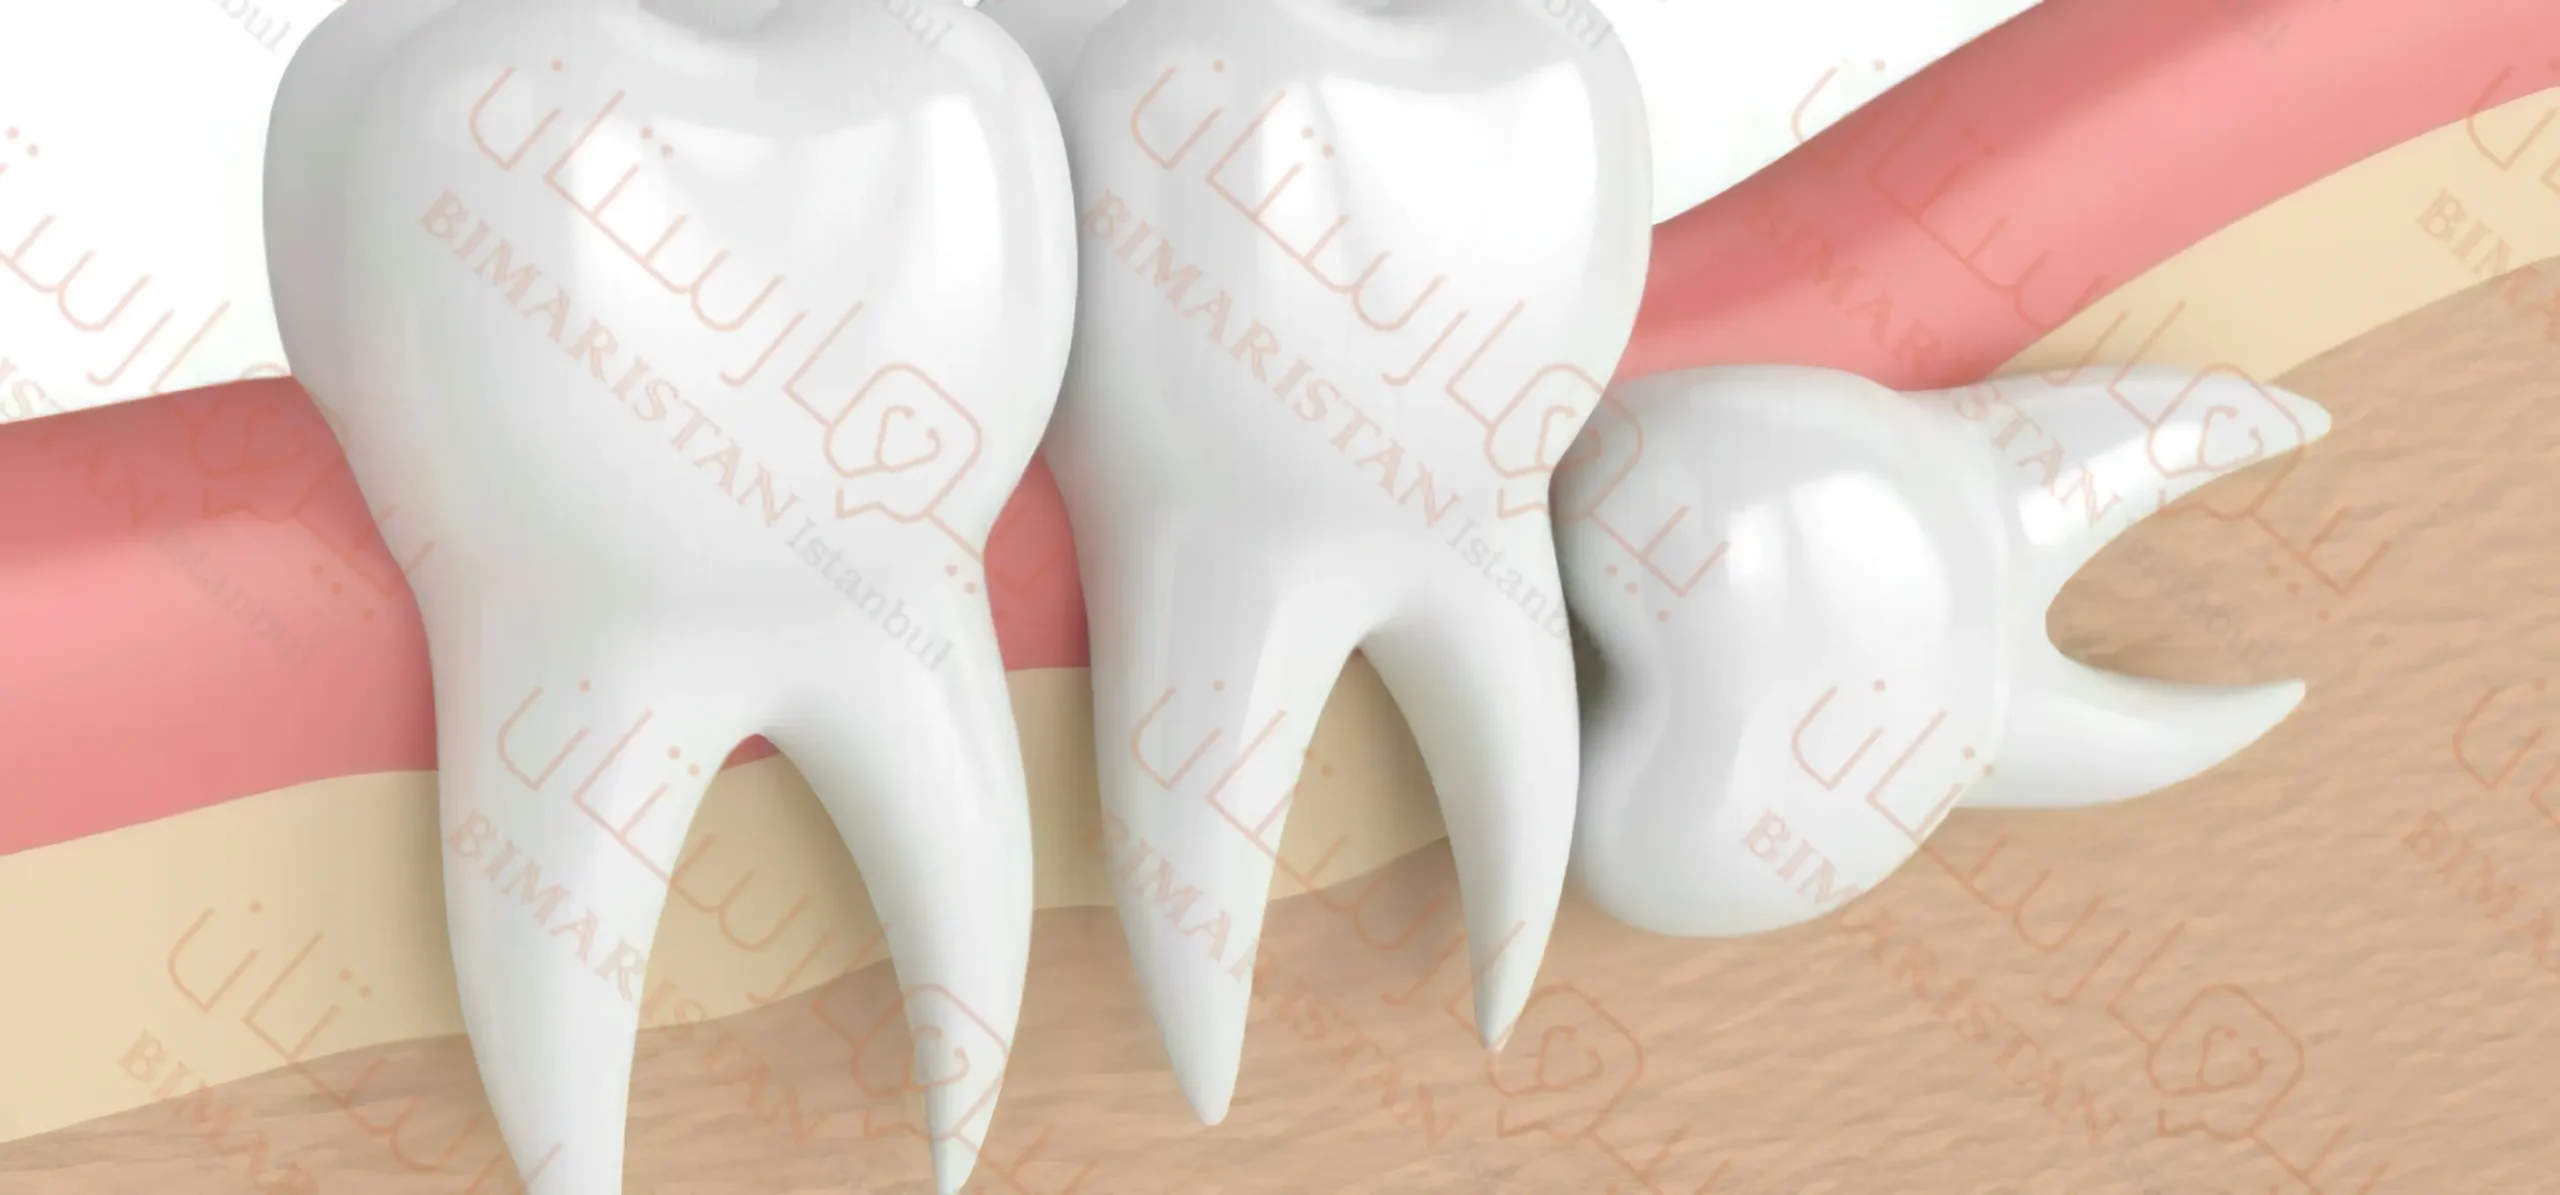 Surgical removal of wisdom teeth in Turkey